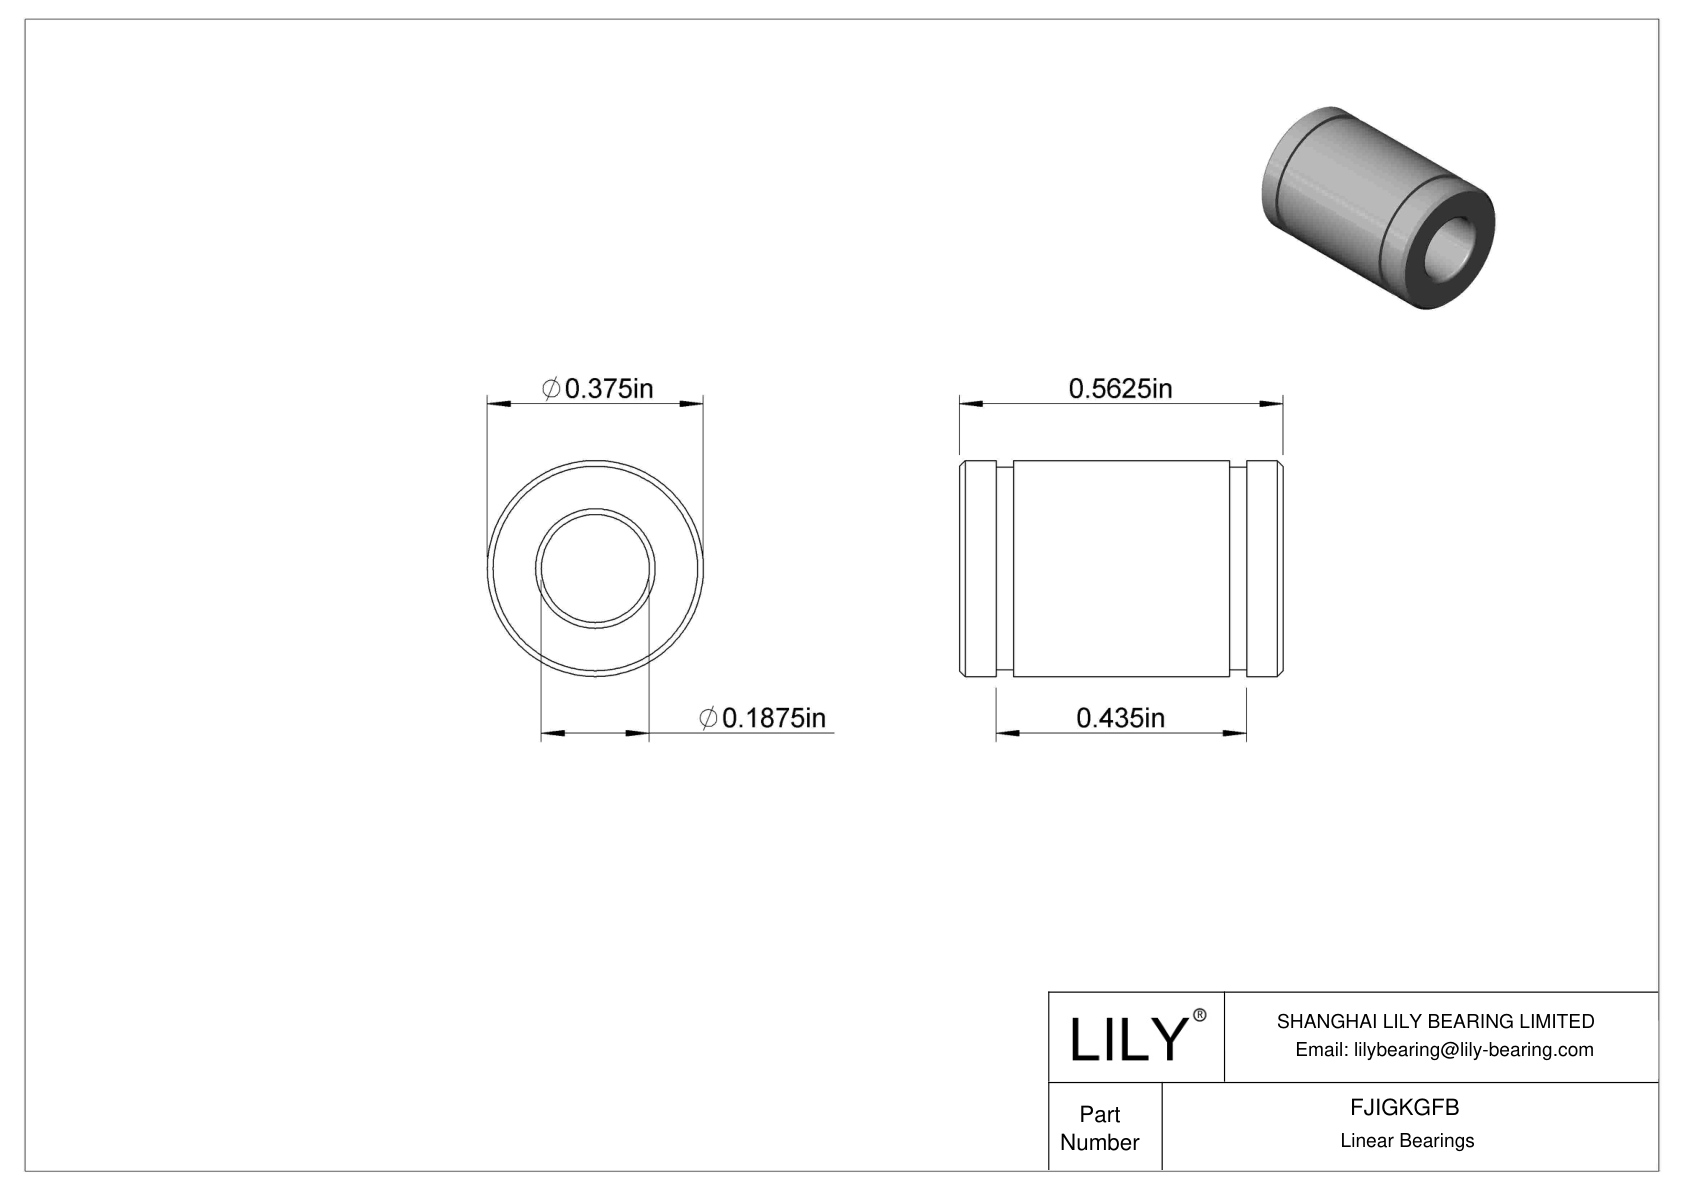 FJIGKGFB Common Linear Sleeve Bearings cad drawing